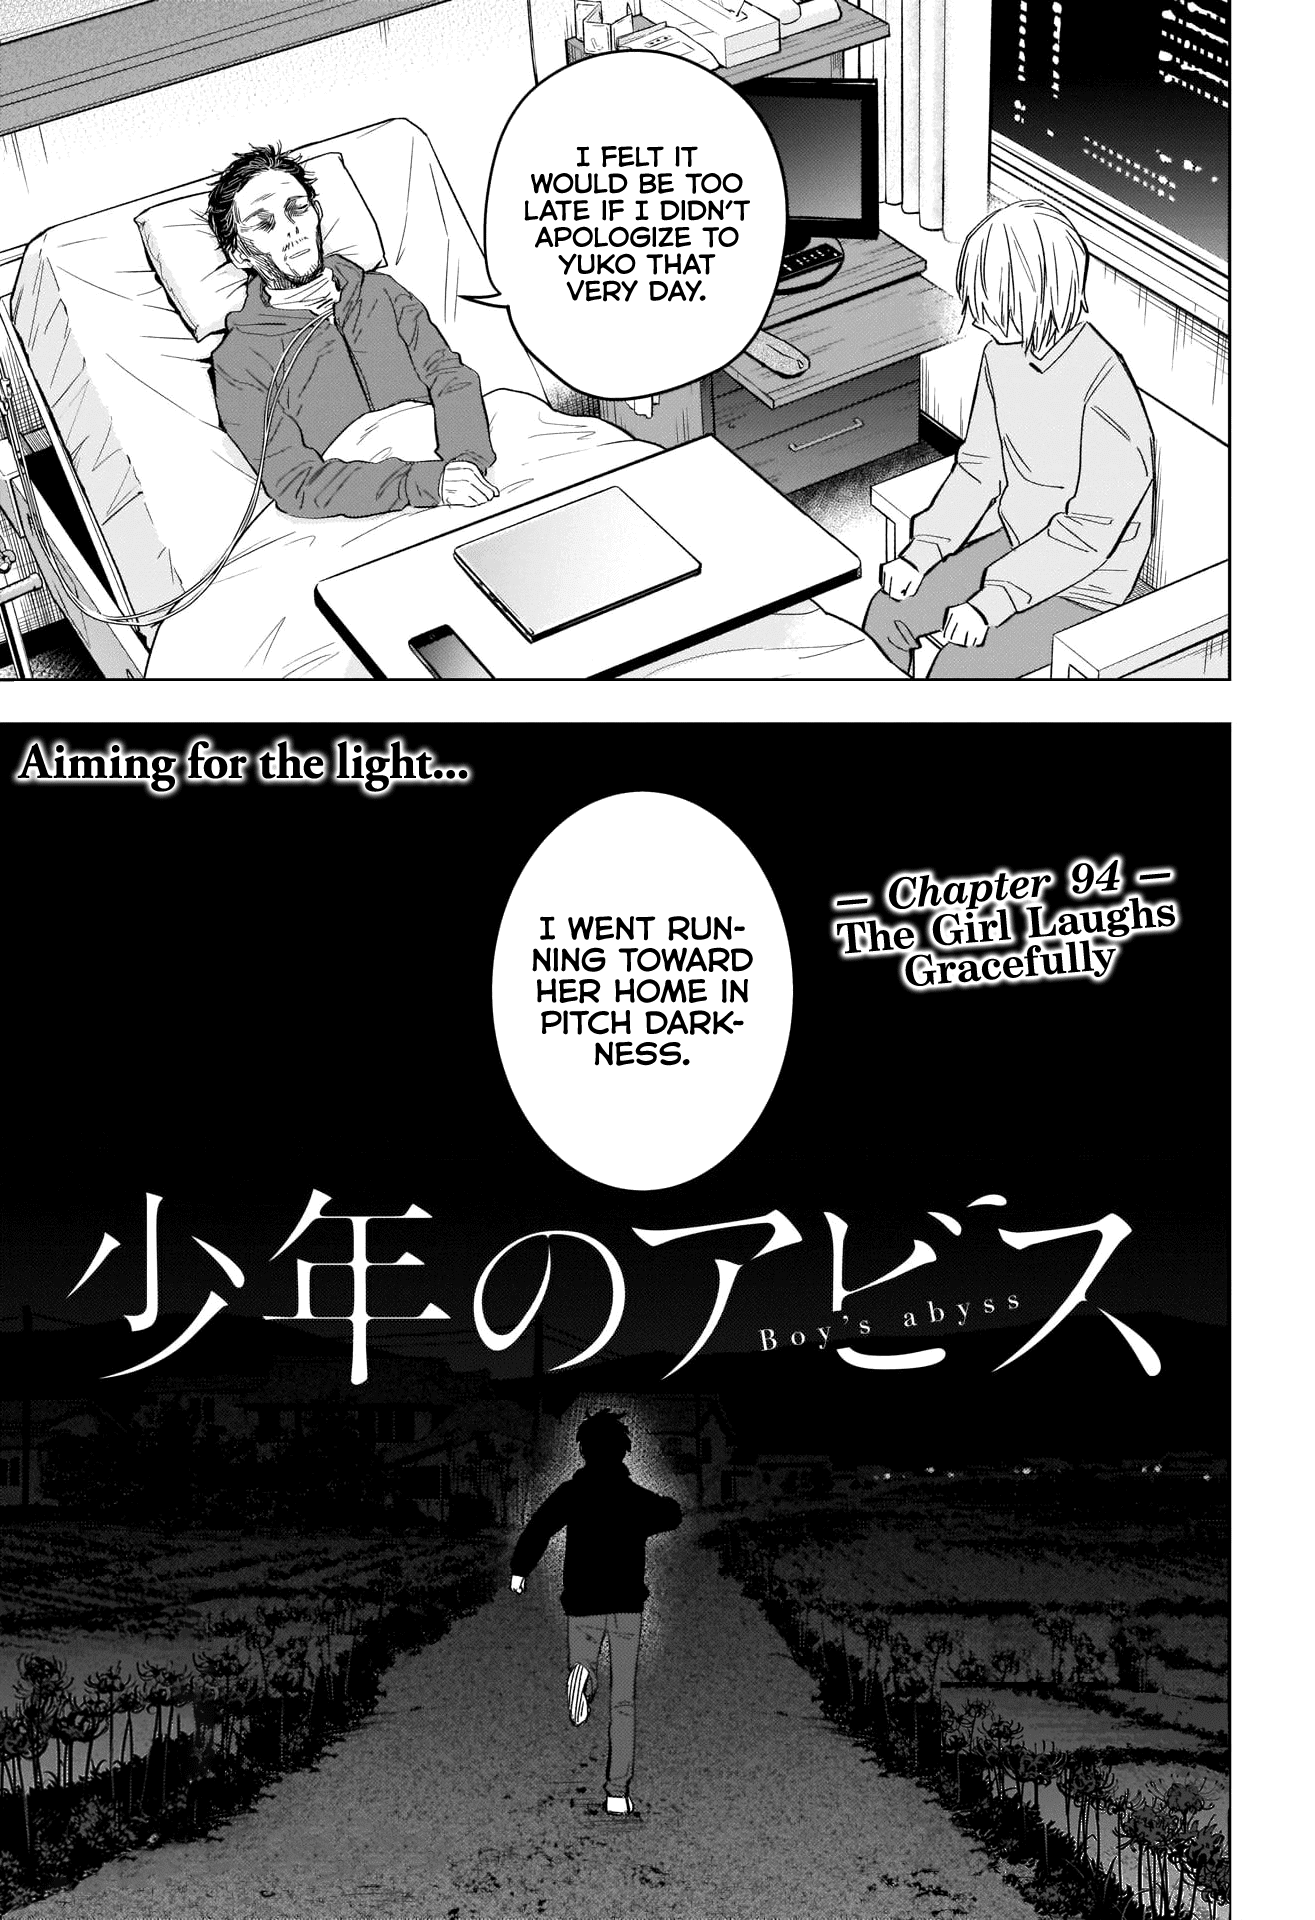 Boy's Abyss Chapter 94: The Girl Laughs Gracefully - Picture 2